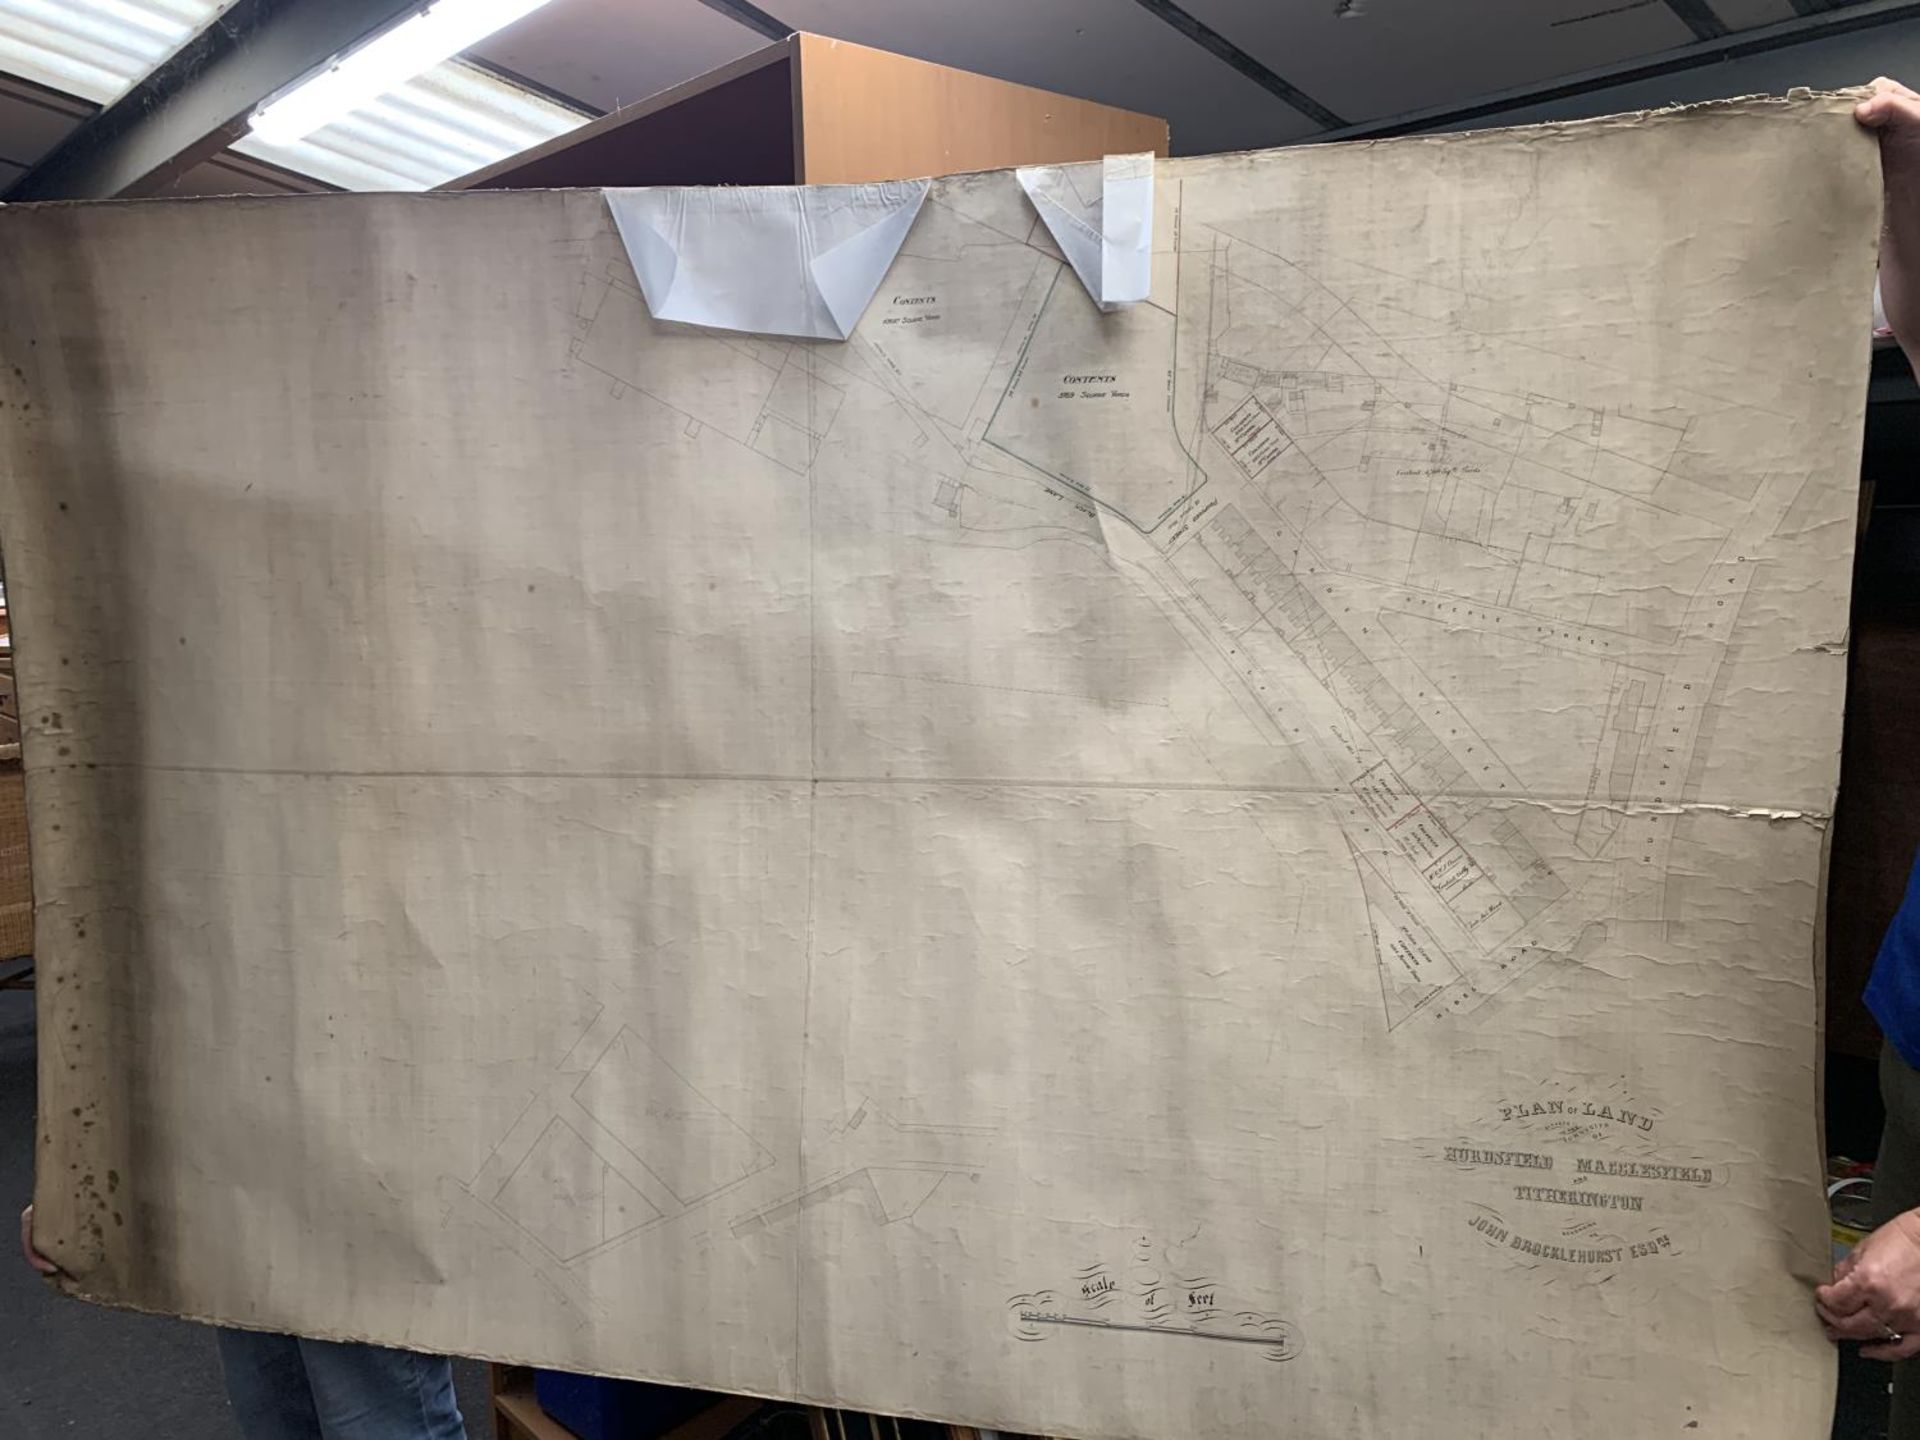 A VERY LARGE MAP OF PLAN SITUATE IN THE TOWNSHIPS OF HURDSFIELD, MACCLESFIELD AND TITHERINGTON